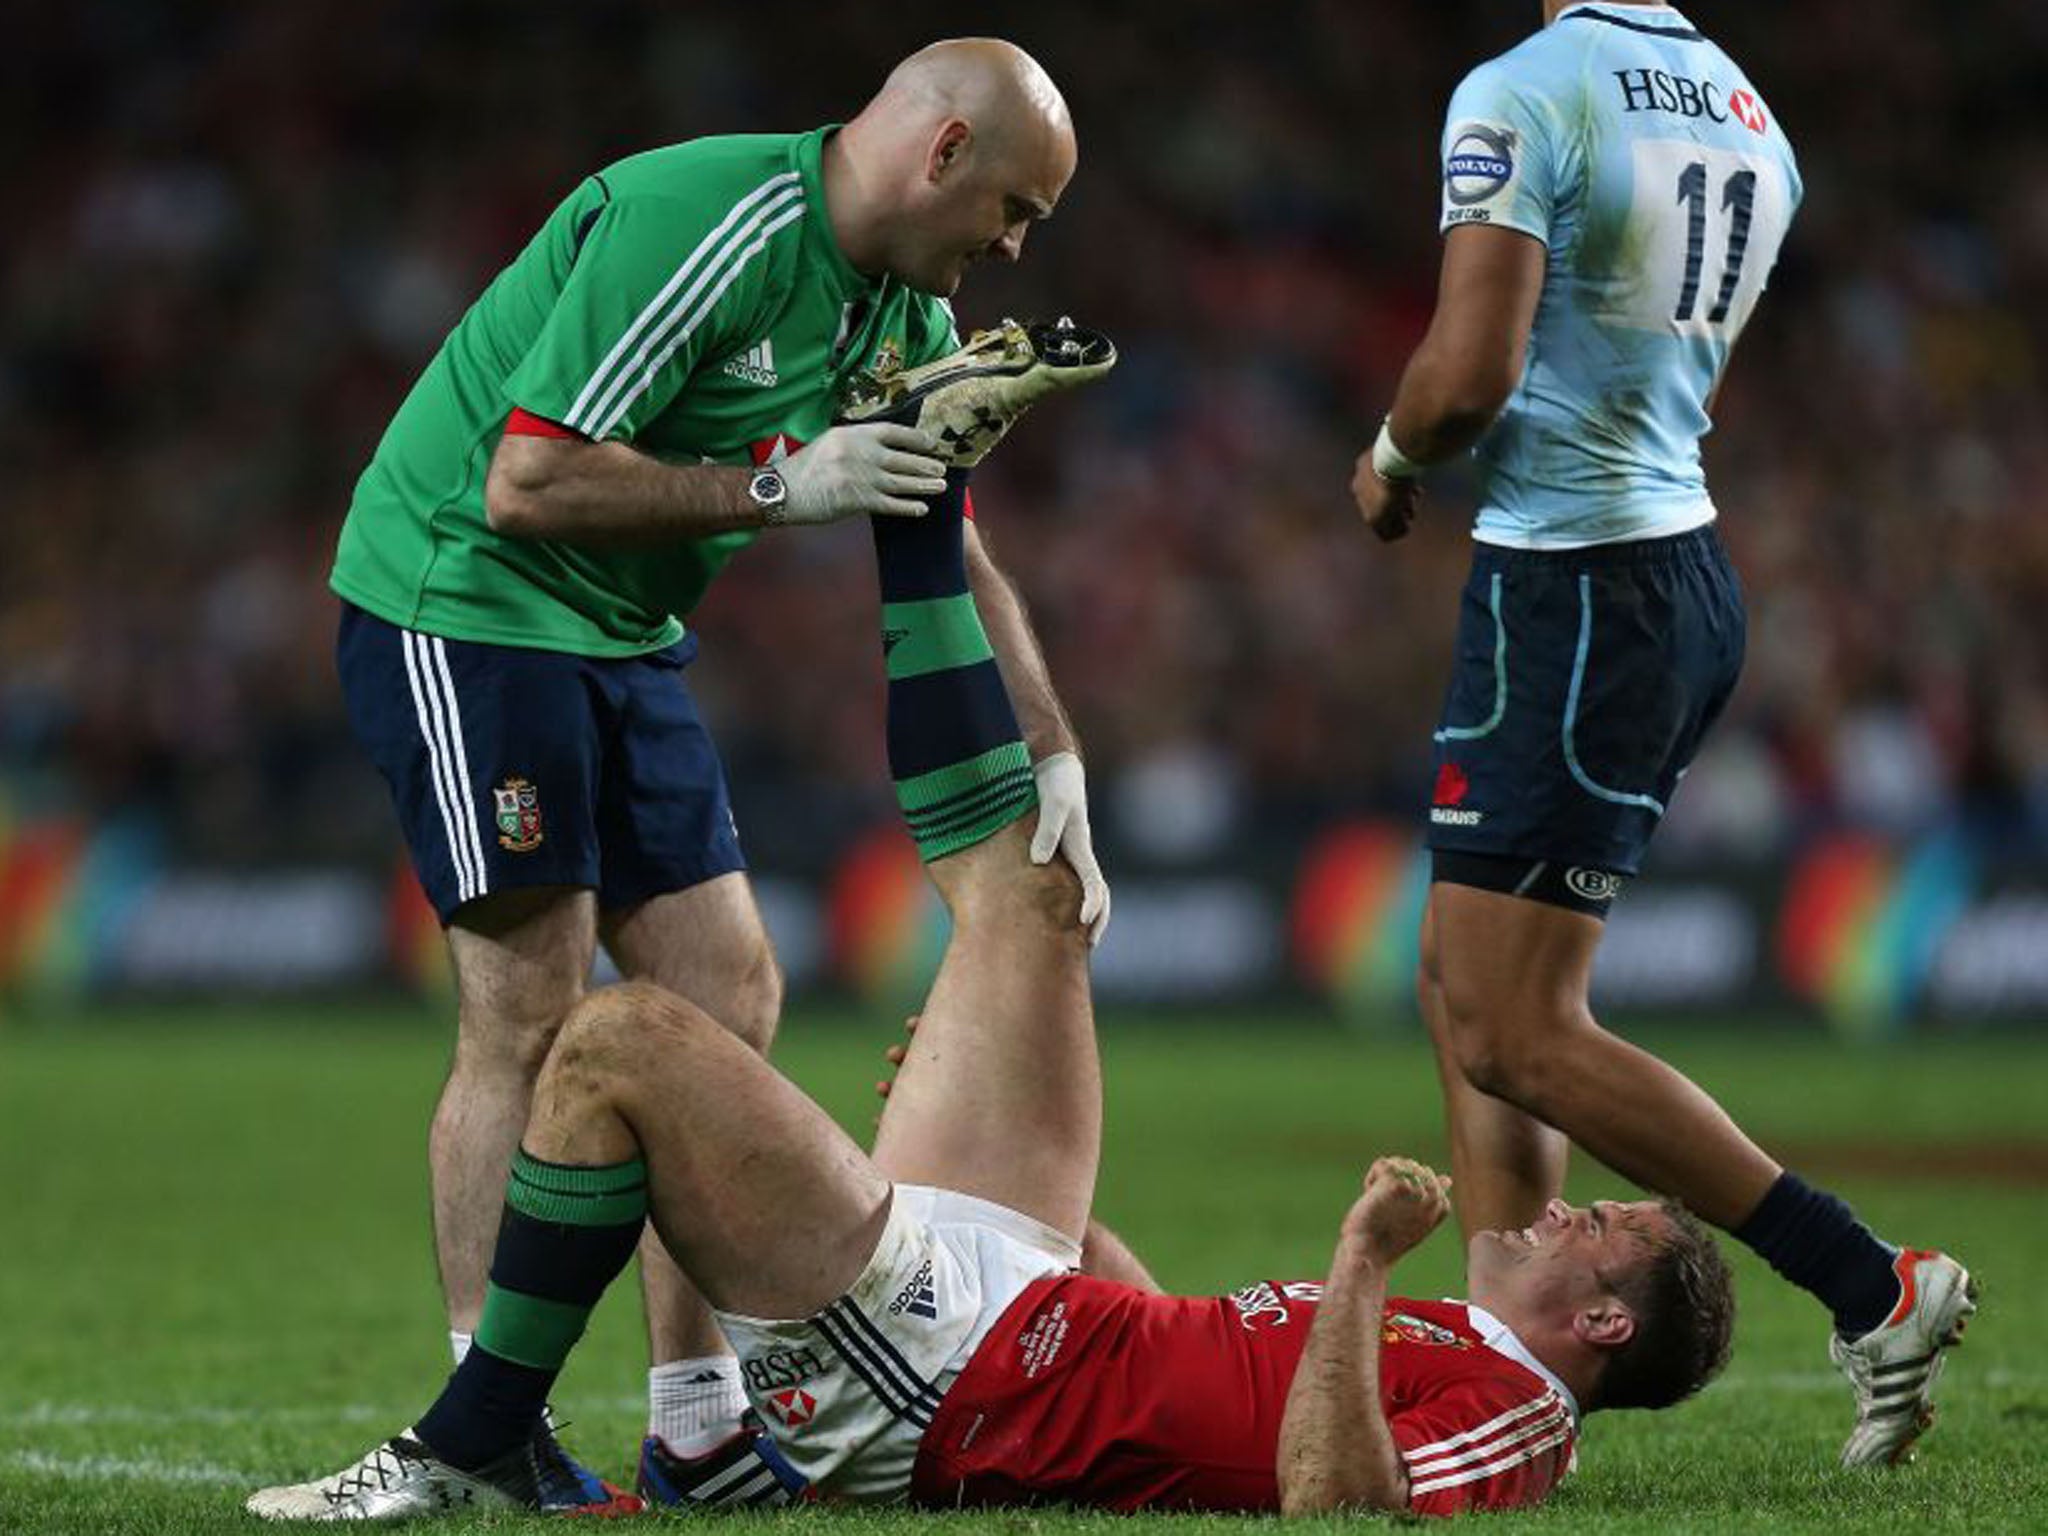 The Lions' Jamie Roberts looked in pain as he received treatment for an injury that could rule him out of the next match (David Davies/PA)